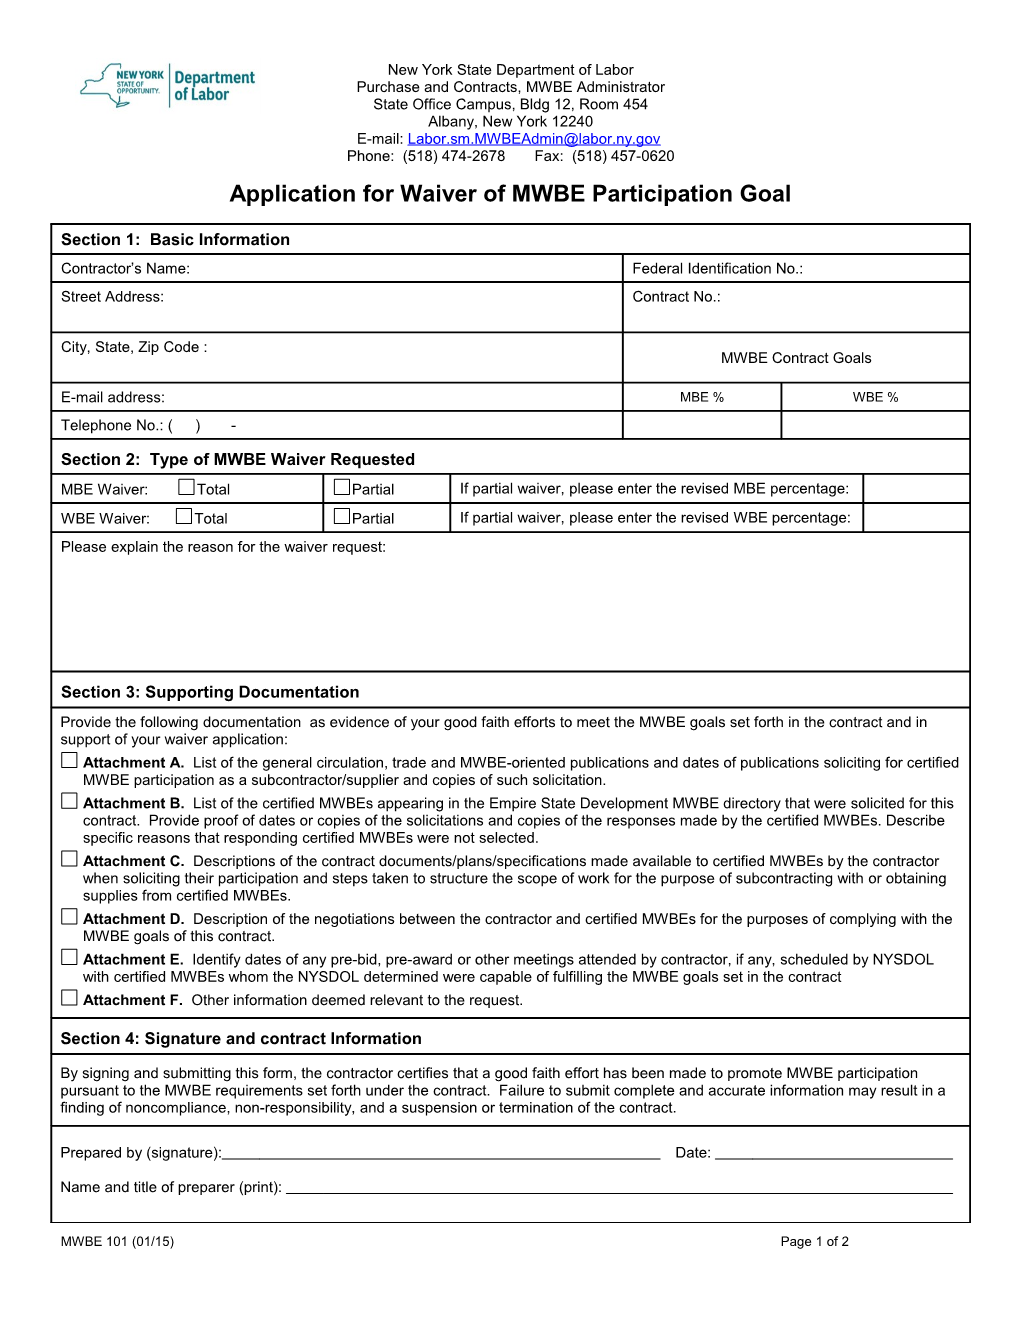 Appendix MWBE-5 - MWBE 101 Application for Waiver of MWBE Participation Goal